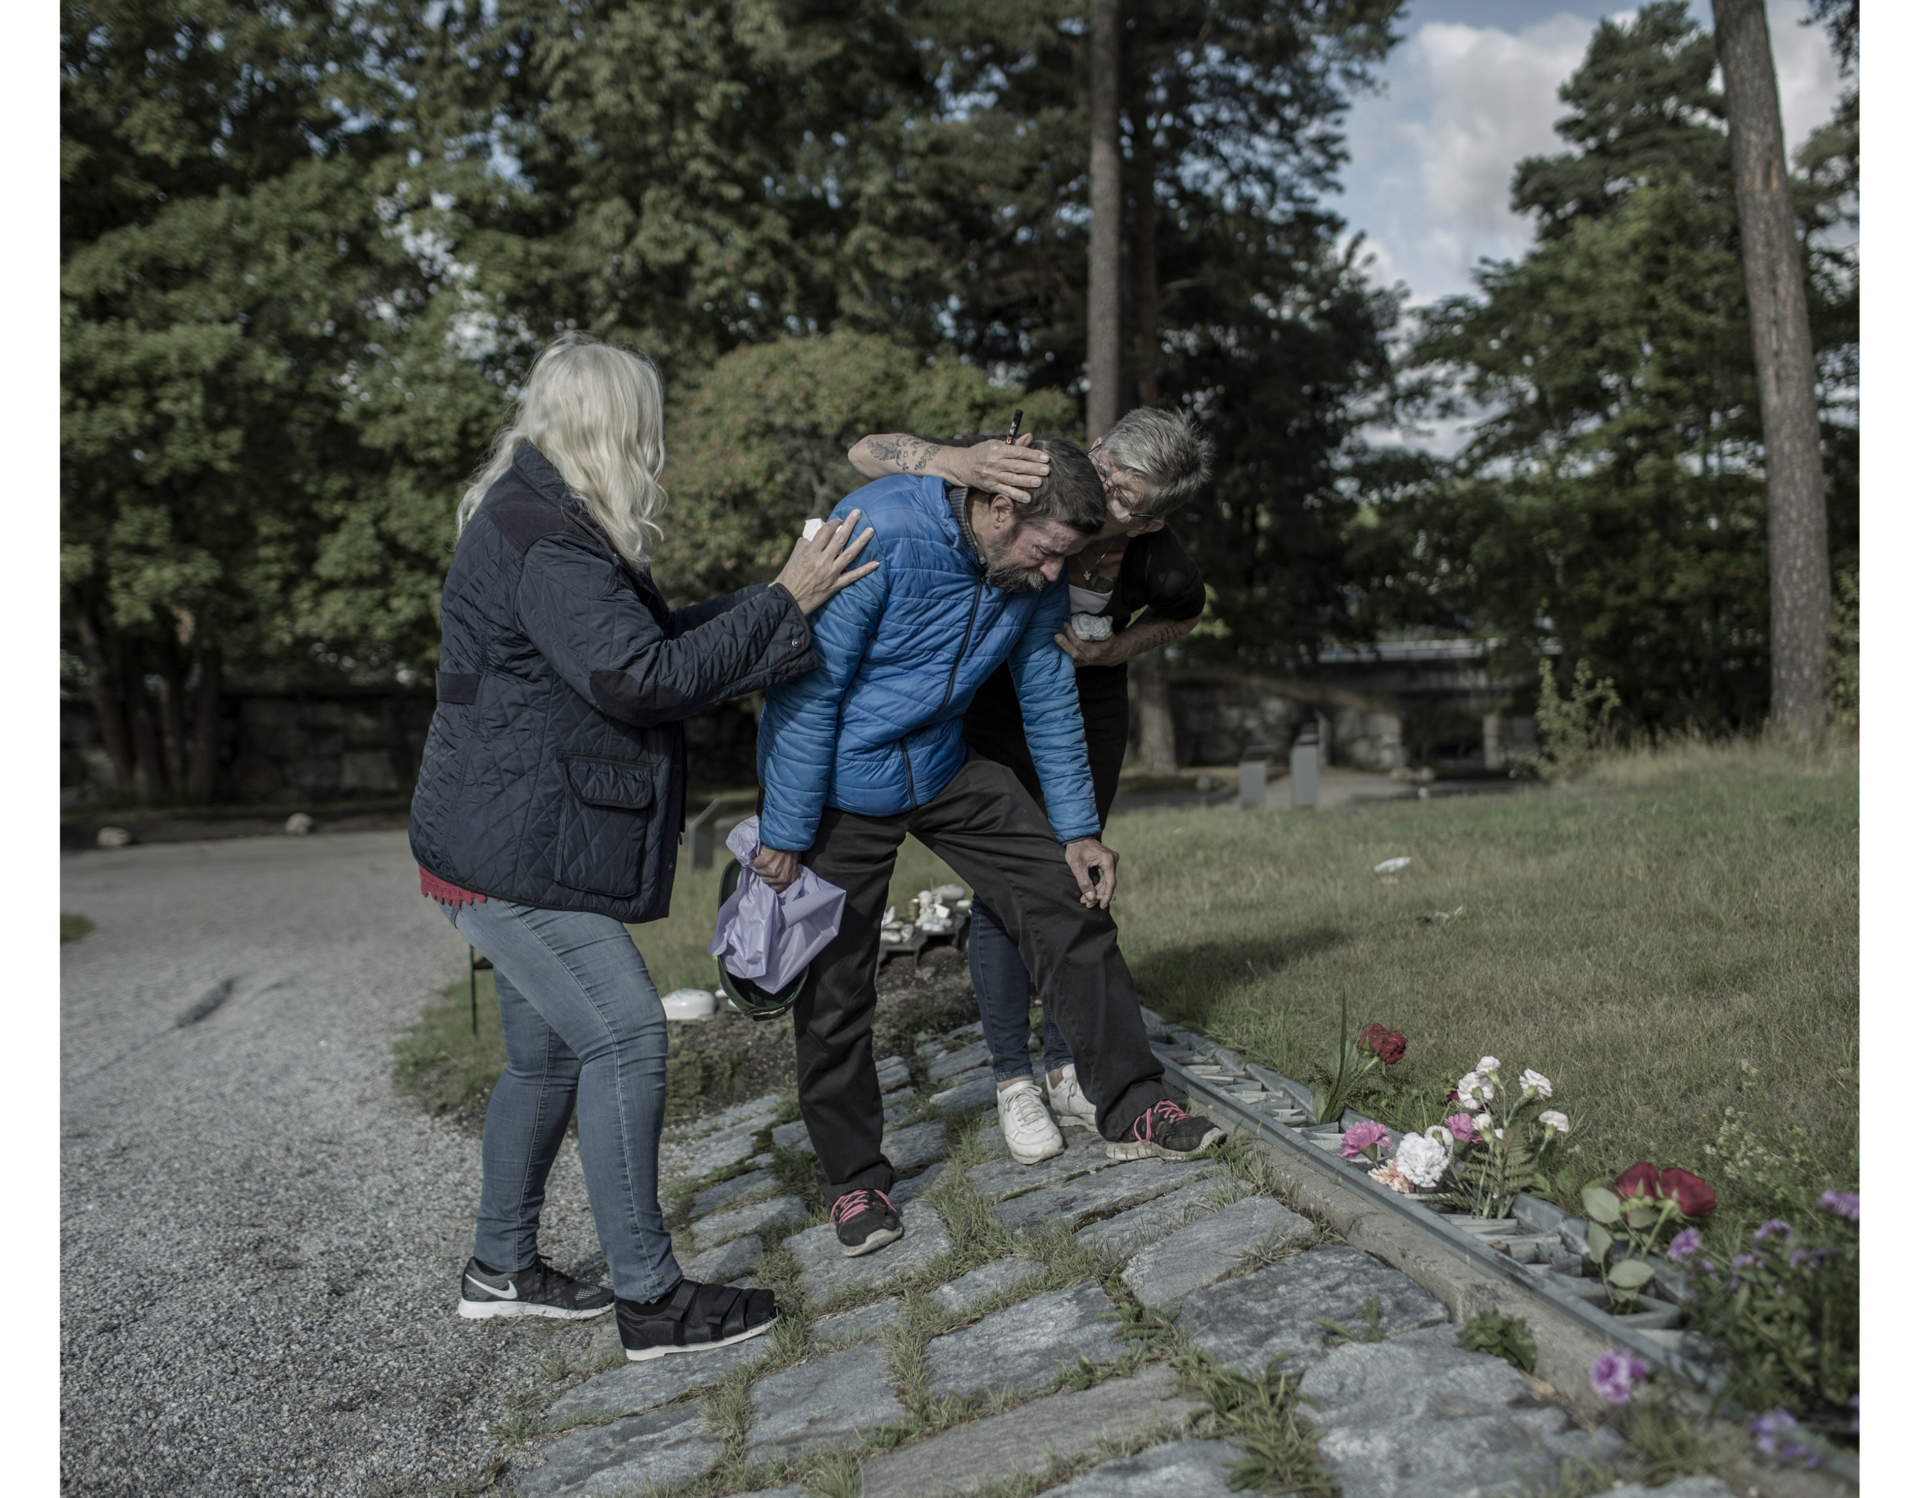 Pekka is dead. Matte is comforted by friends as he visits a memorial to give a flower to his best friend Pekka. Tears are running down his face. He has difficulty standing up